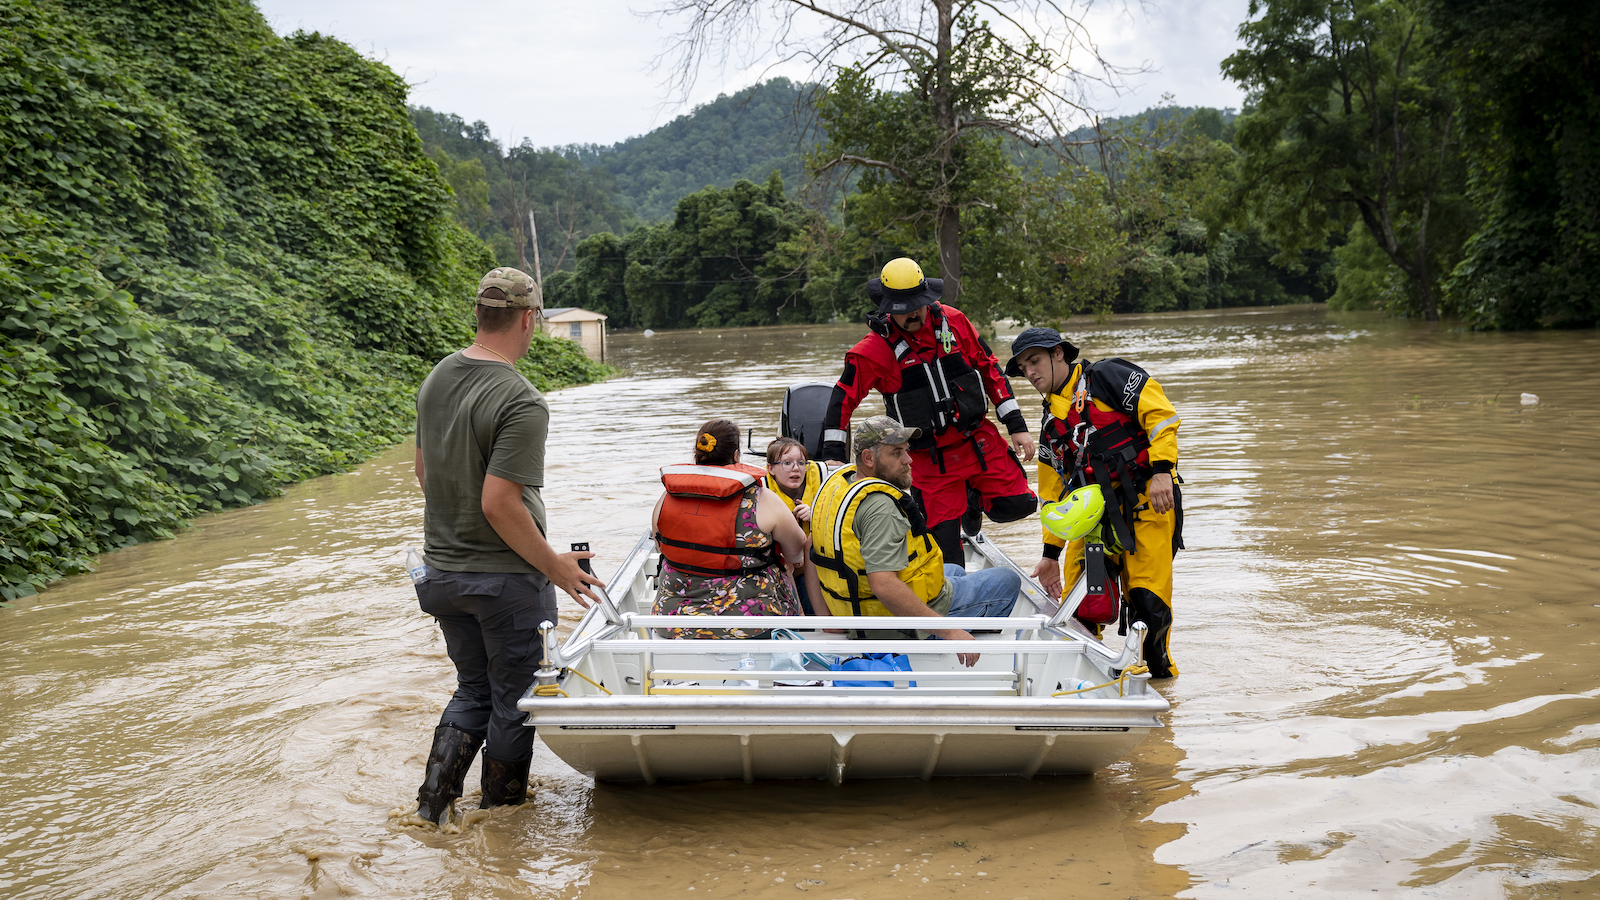 A group of people are rescued in a boat in muddy waters surrounded by mountains.